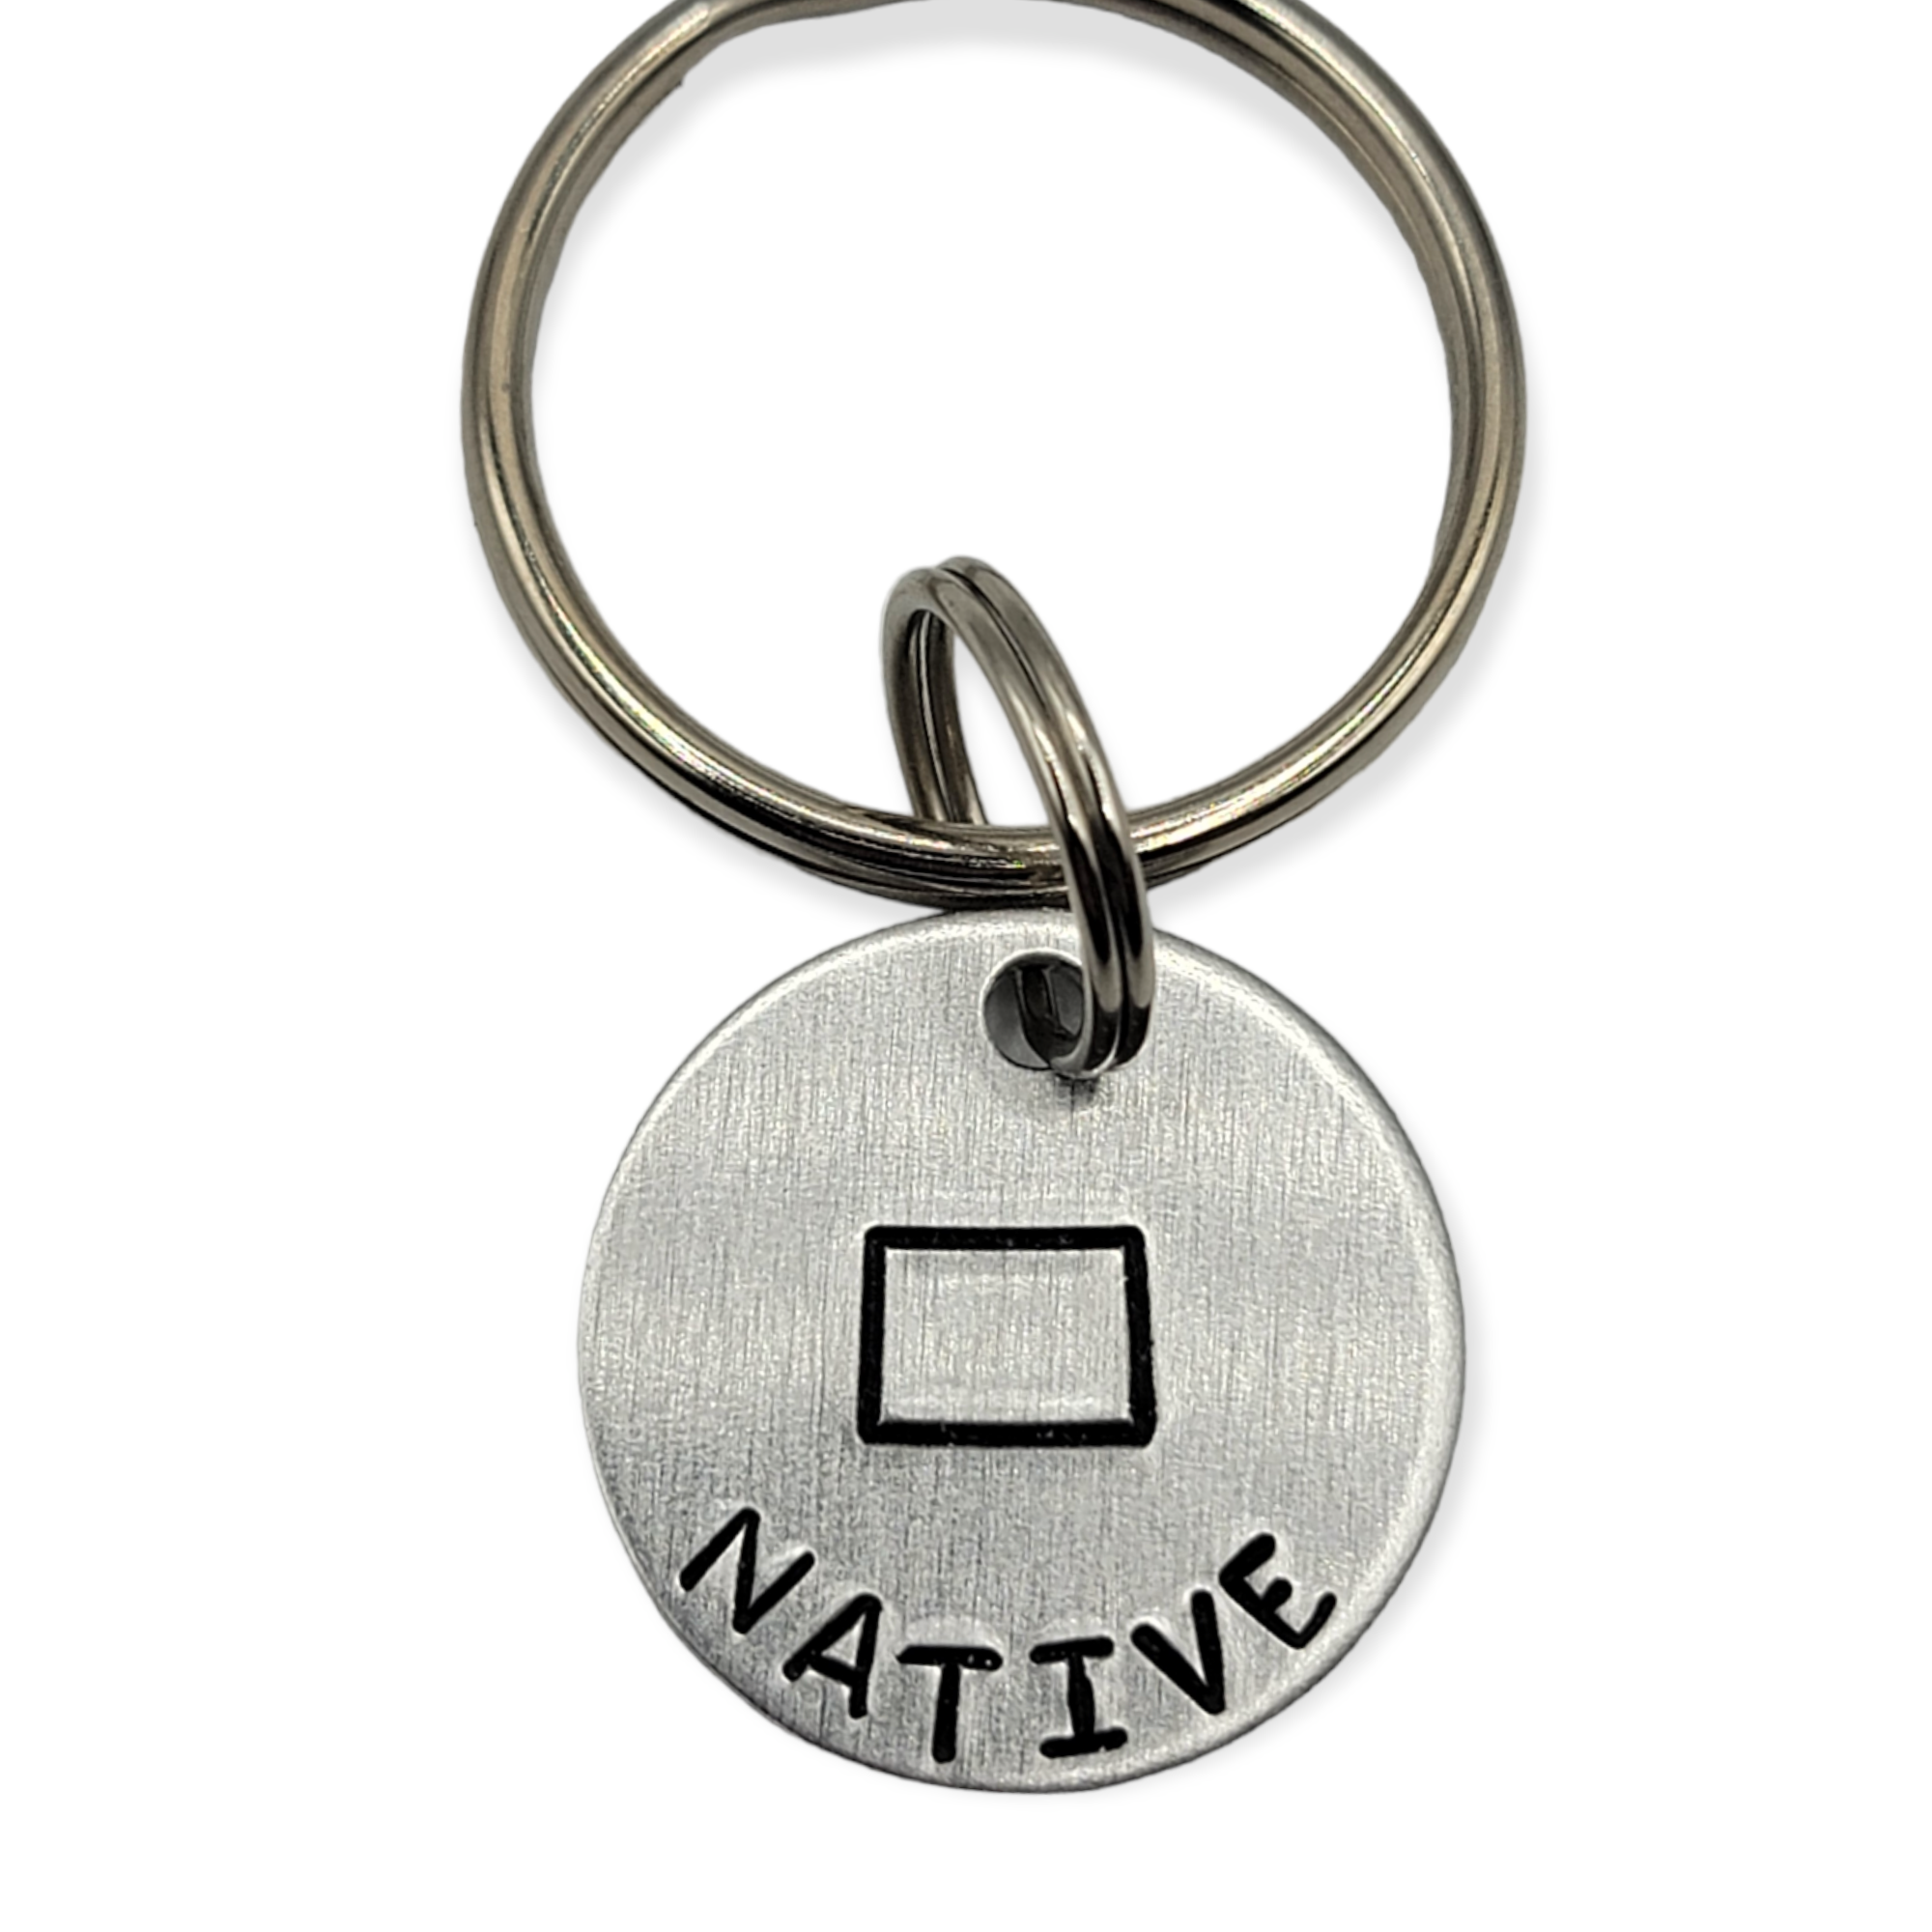 "NATIVE" (PICK YOUR STATE) Keychain - customized to your state US only - Travelers Trade Post